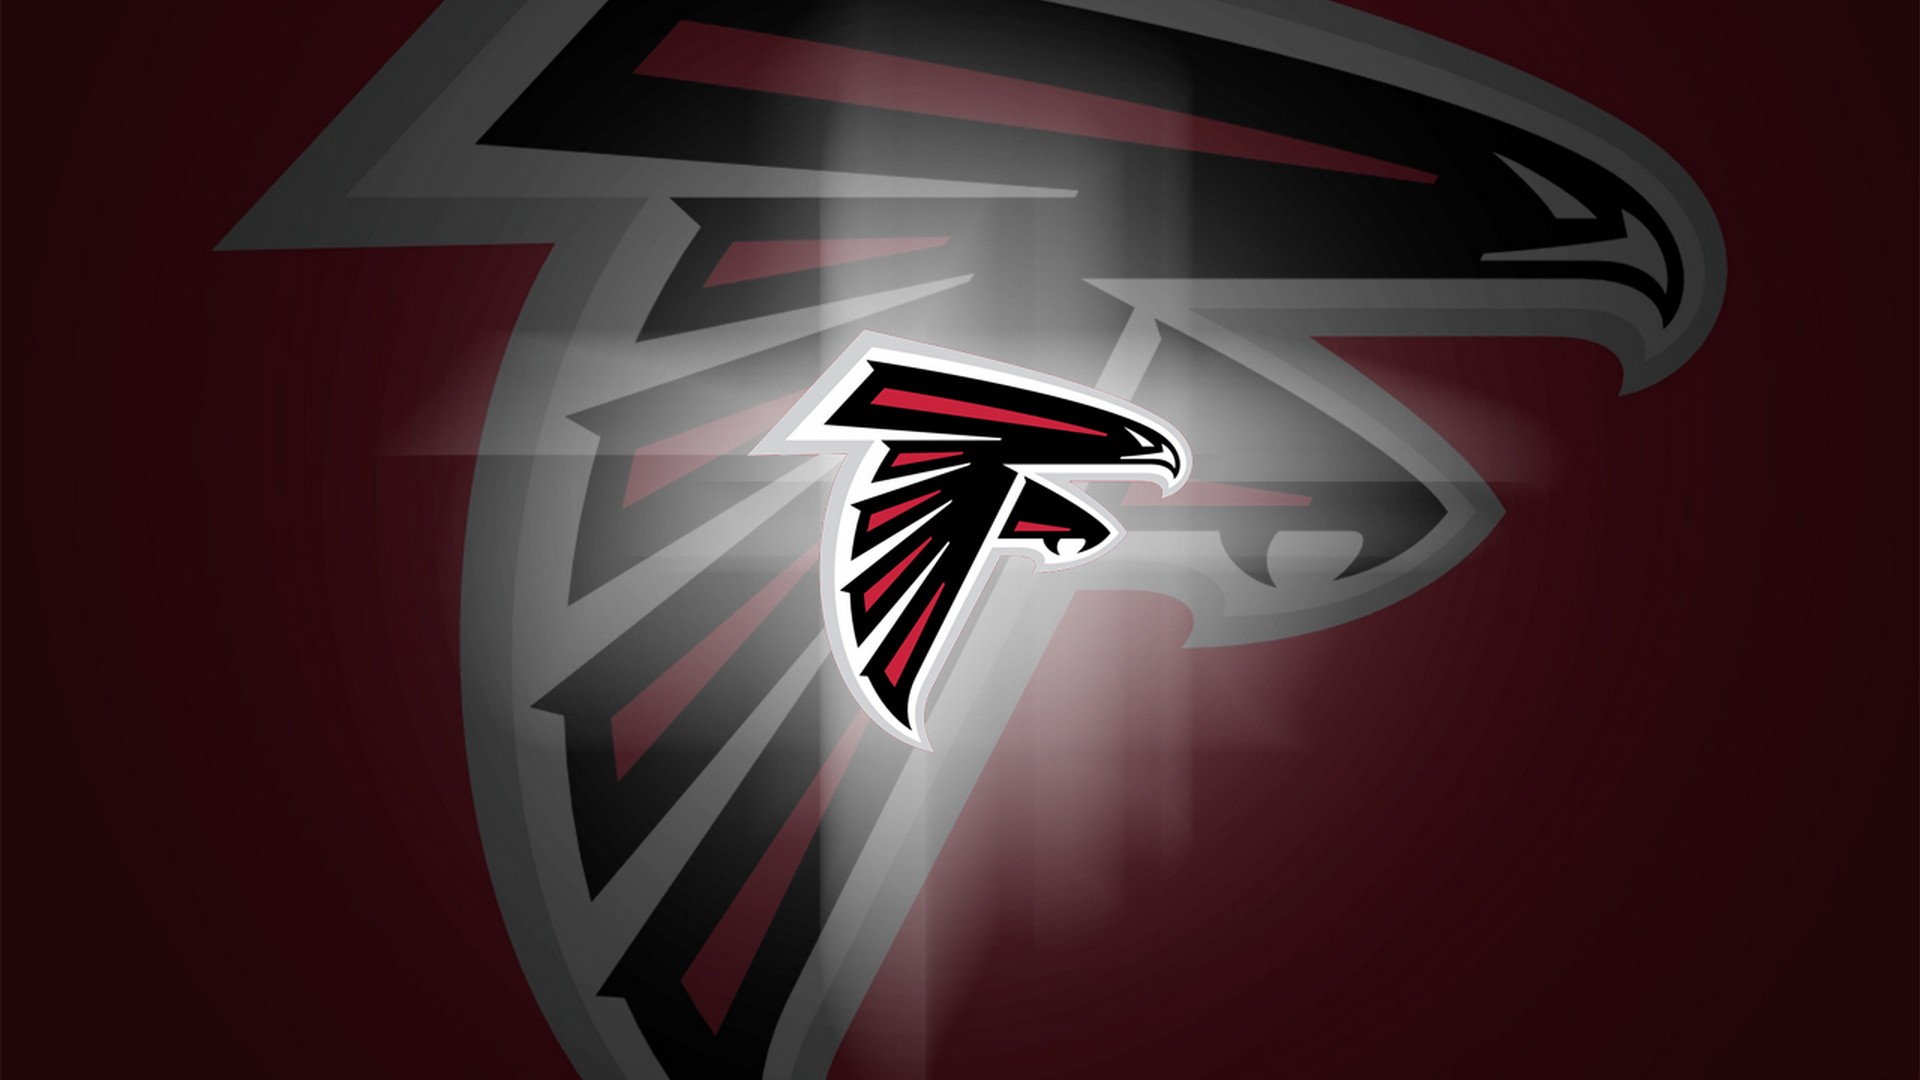 Falcons Desktop Wallpapers With high-resolution 1920X1080 pixel. You can use this wallpaper for your Mac or Windows Desktop Background, iPhone, Android or Tablet and another Smartphone device